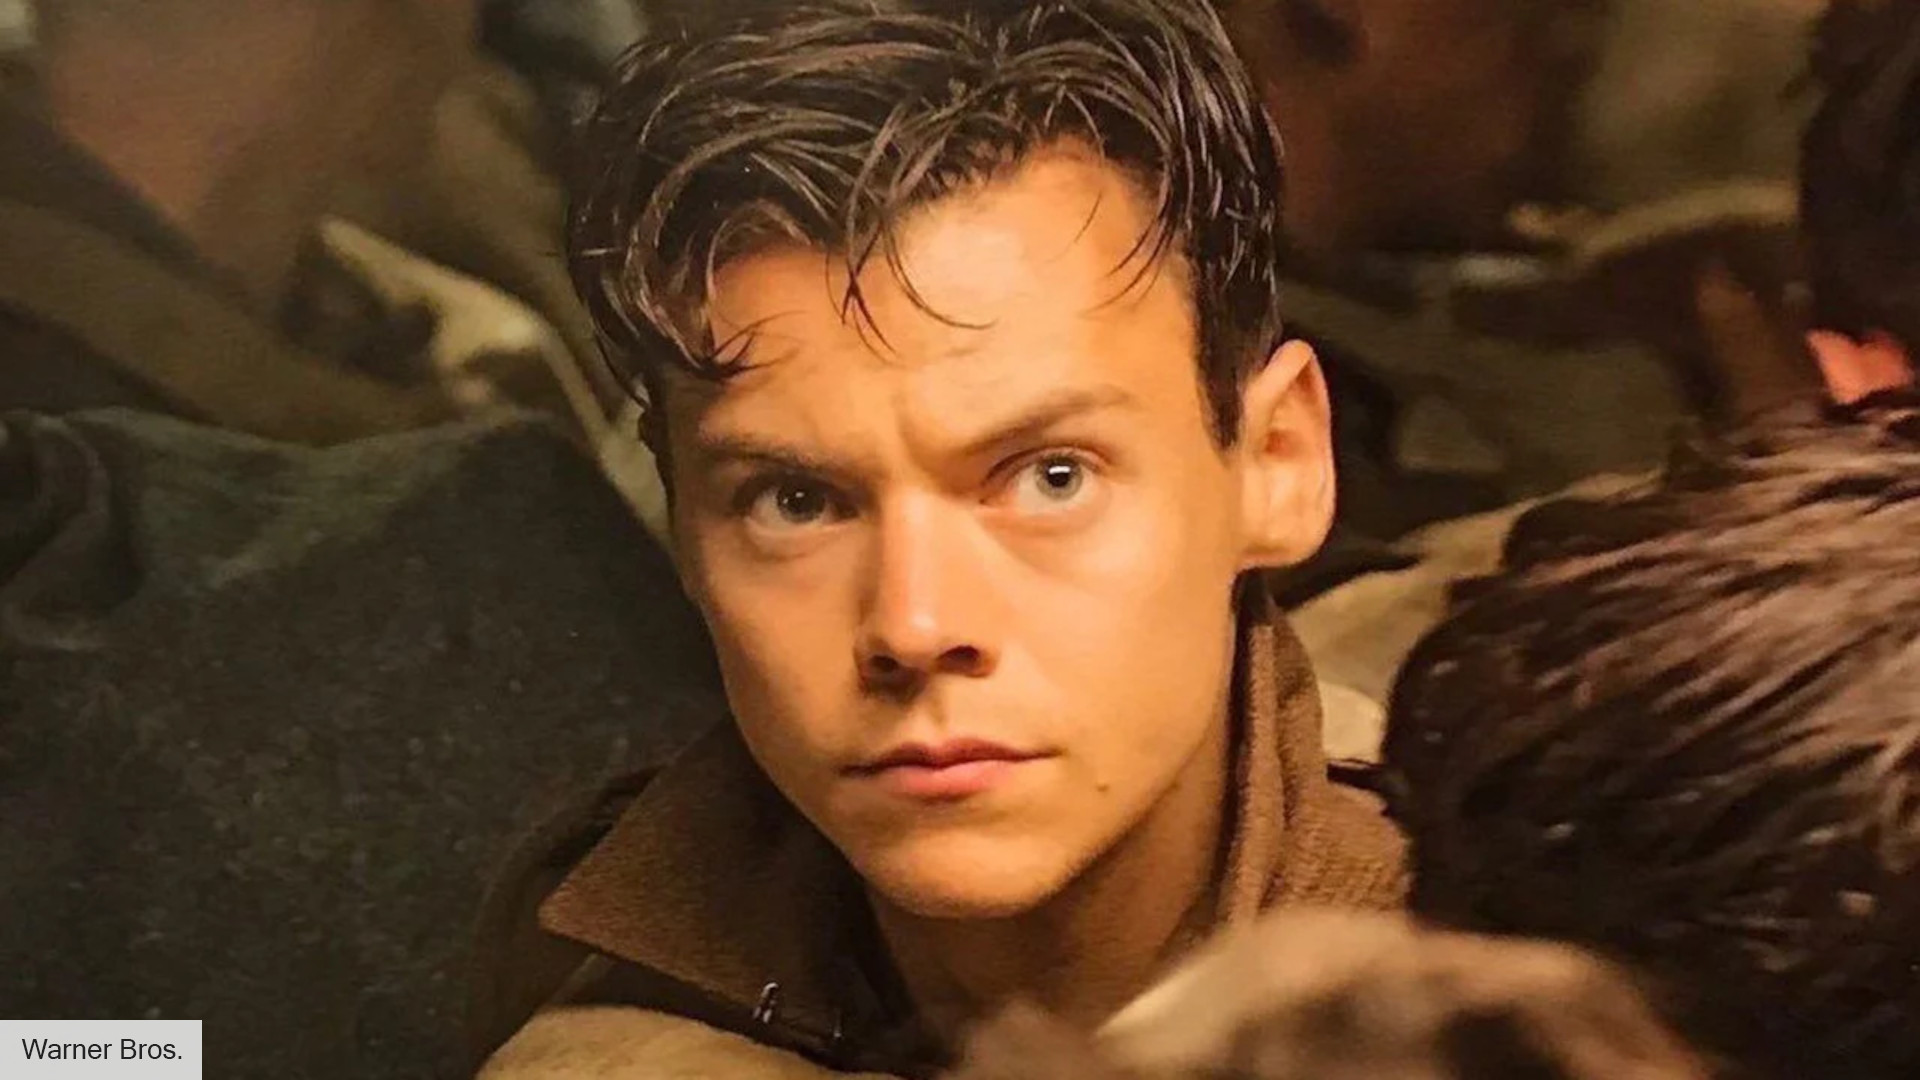 All the Harry Styles movies ranked, from best to worst